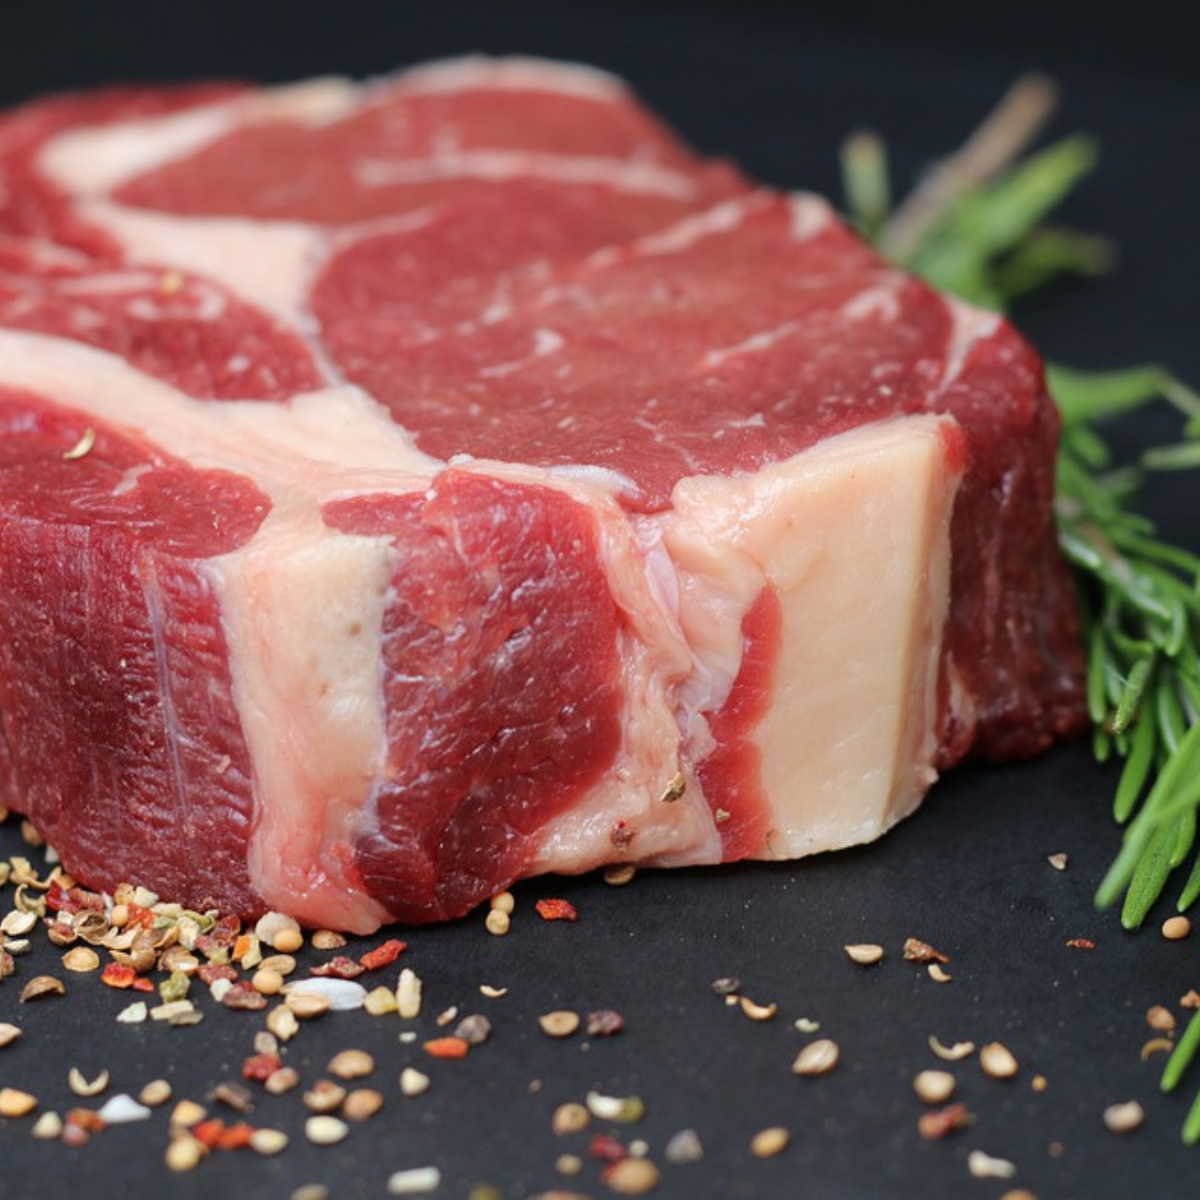 USDA Grading 101: What is Prime Beef?